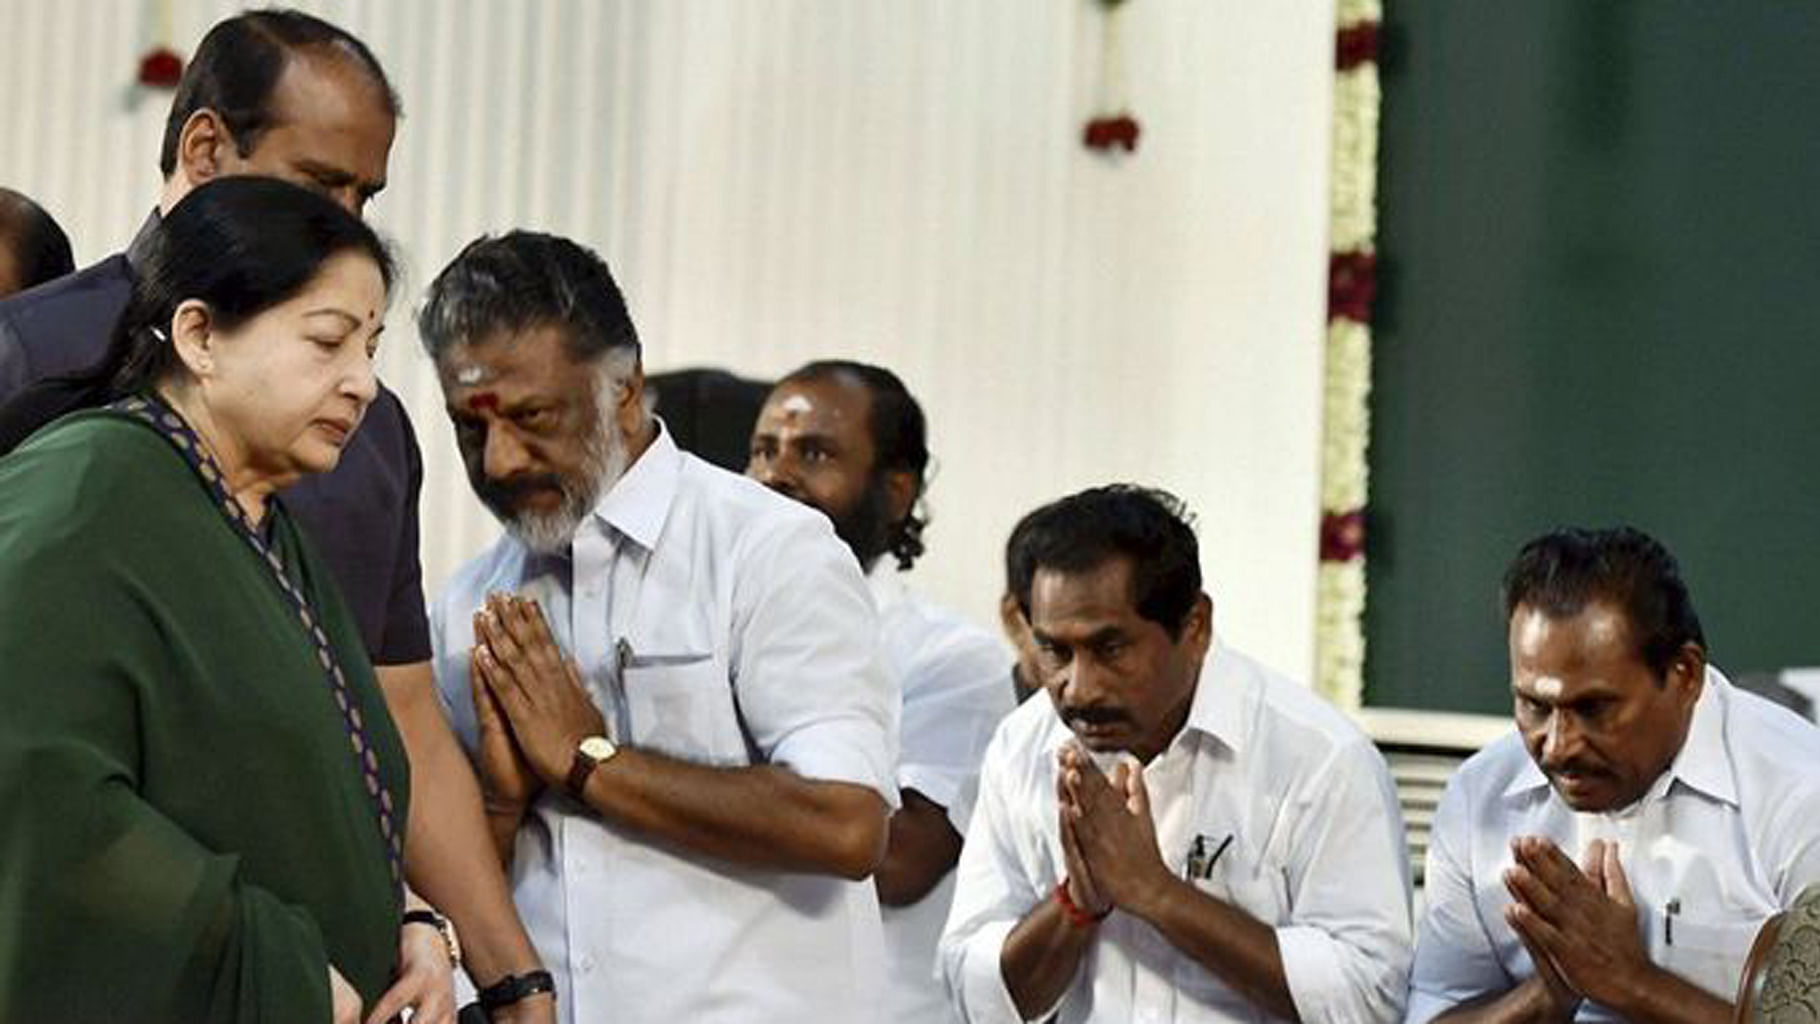 O Panneerselvam said he was ready to appear before a commission probing the death of late chief minister J Jayalalithaa and “explain the truth”.